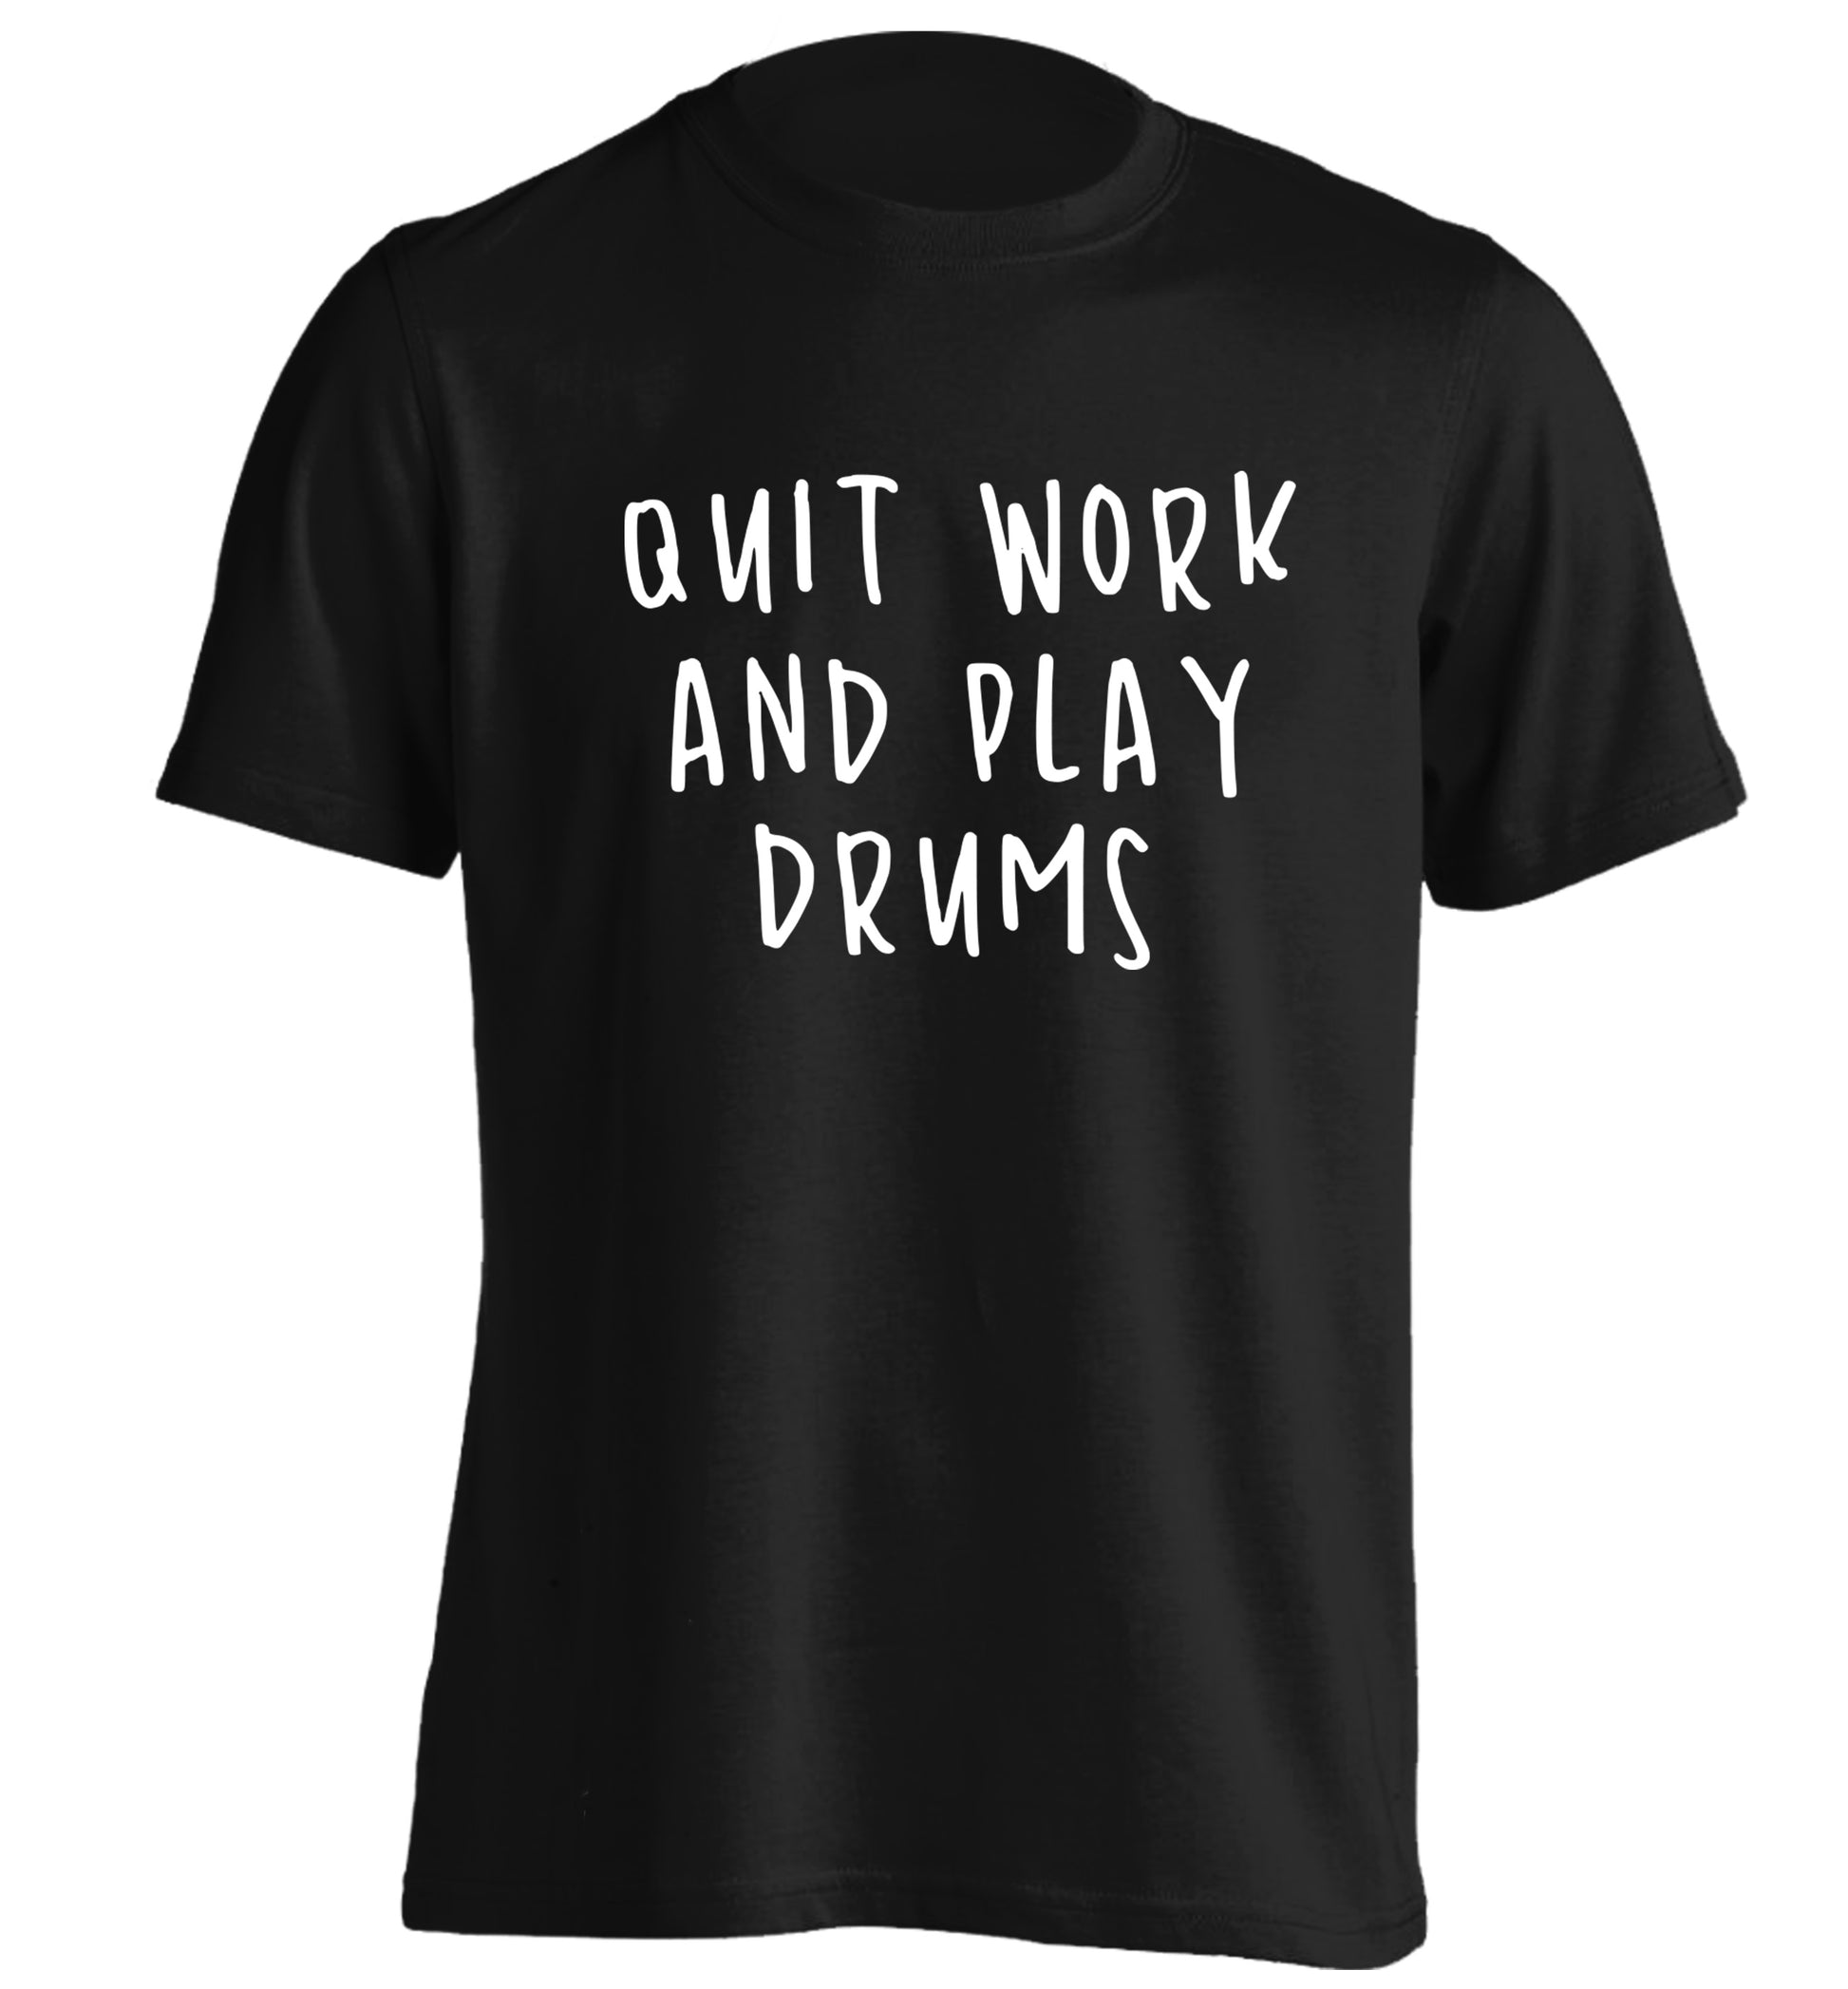 Quit work and play drums adults unisex black Tshirt 2XL